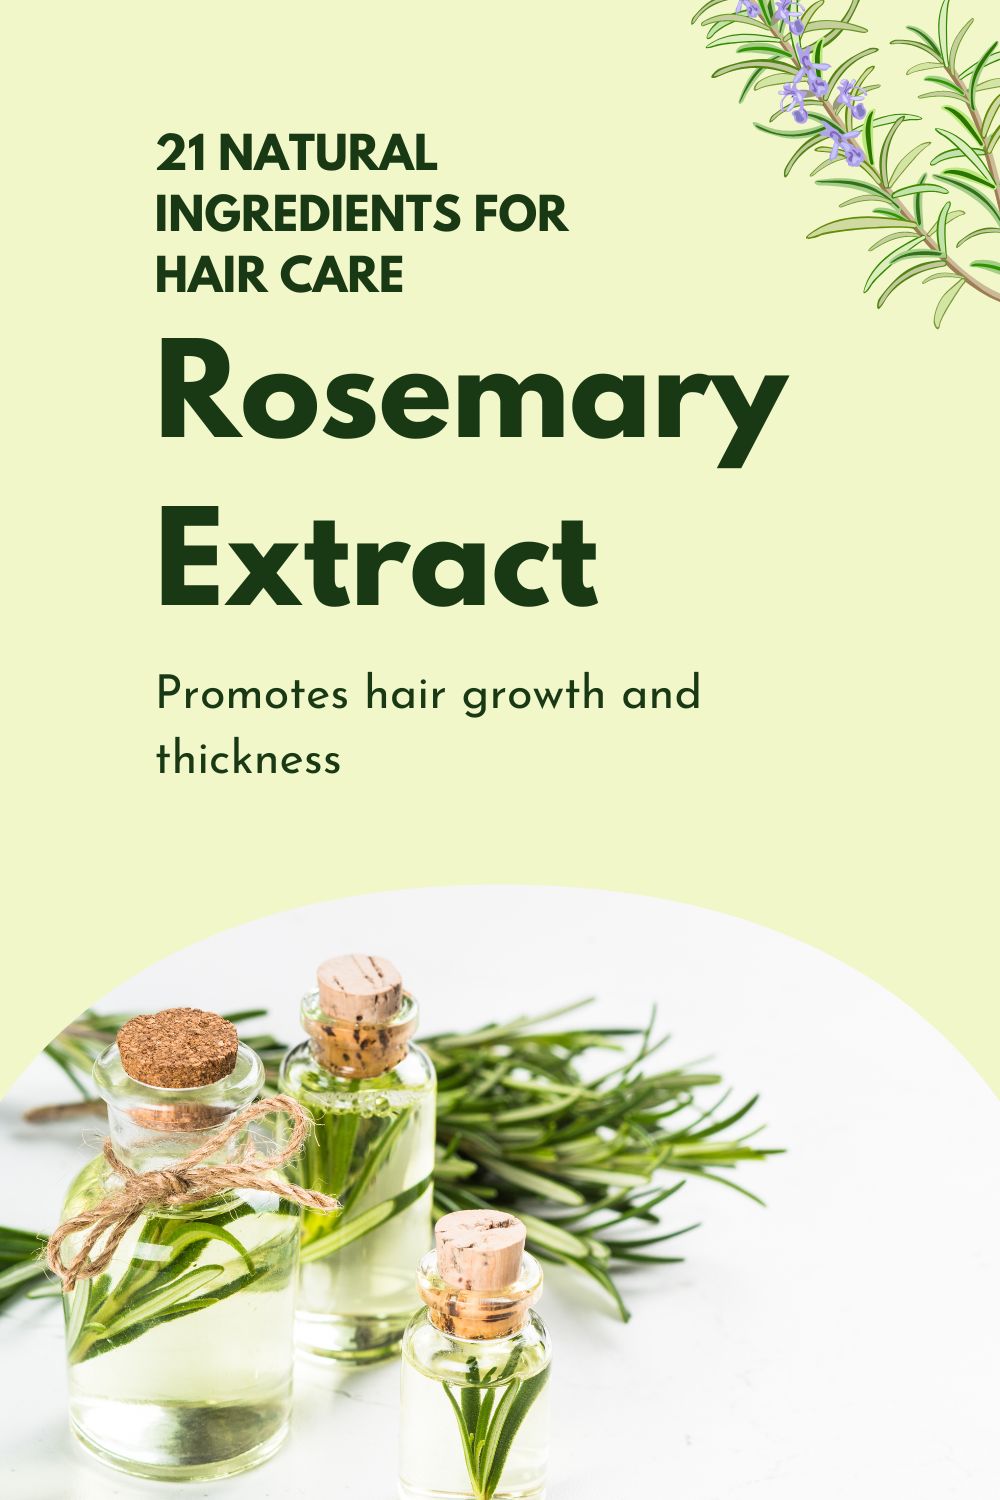 Rosemary Extract - Promotes hair growth and thickness